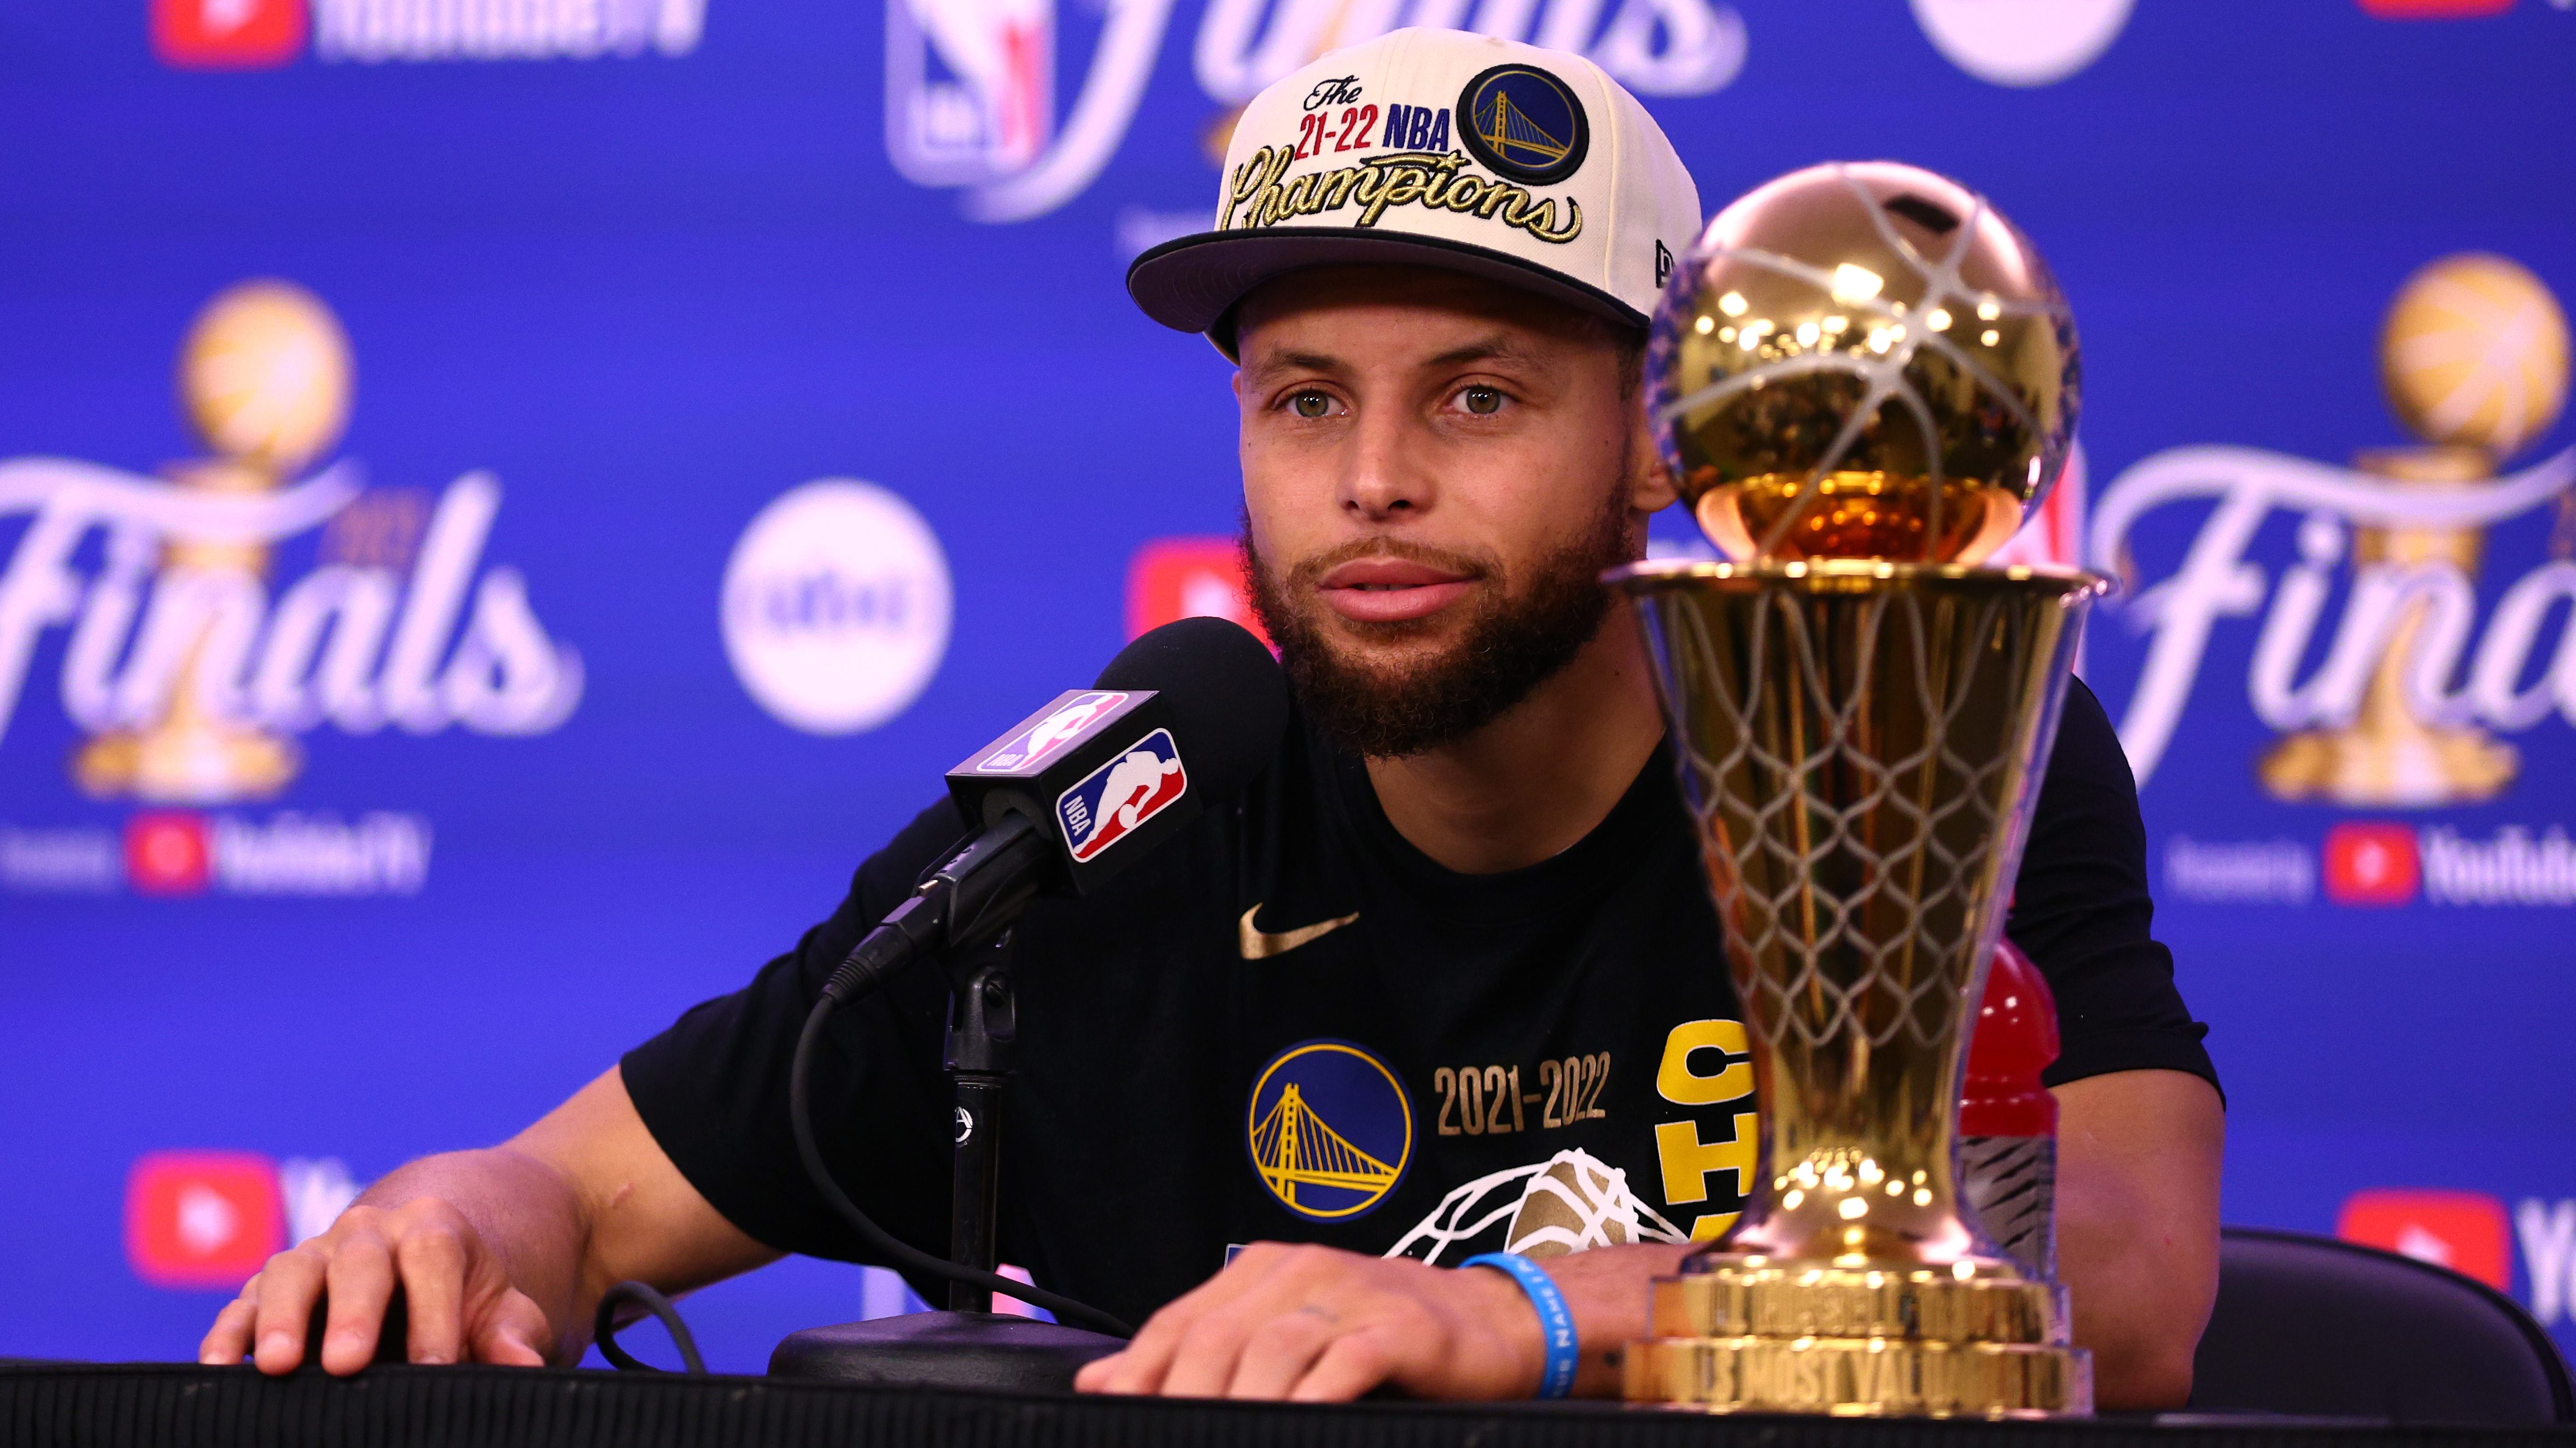 3 Facts About The Steph Curry & Under Armour Partnership